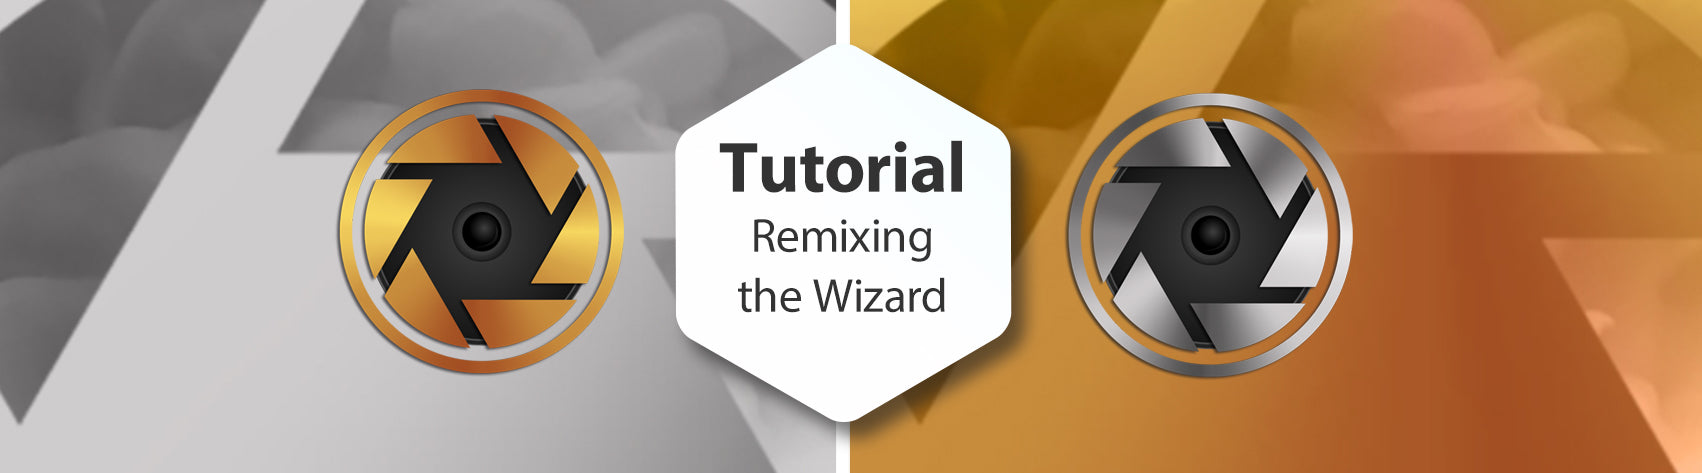 Lesson - Remixing the Wizard